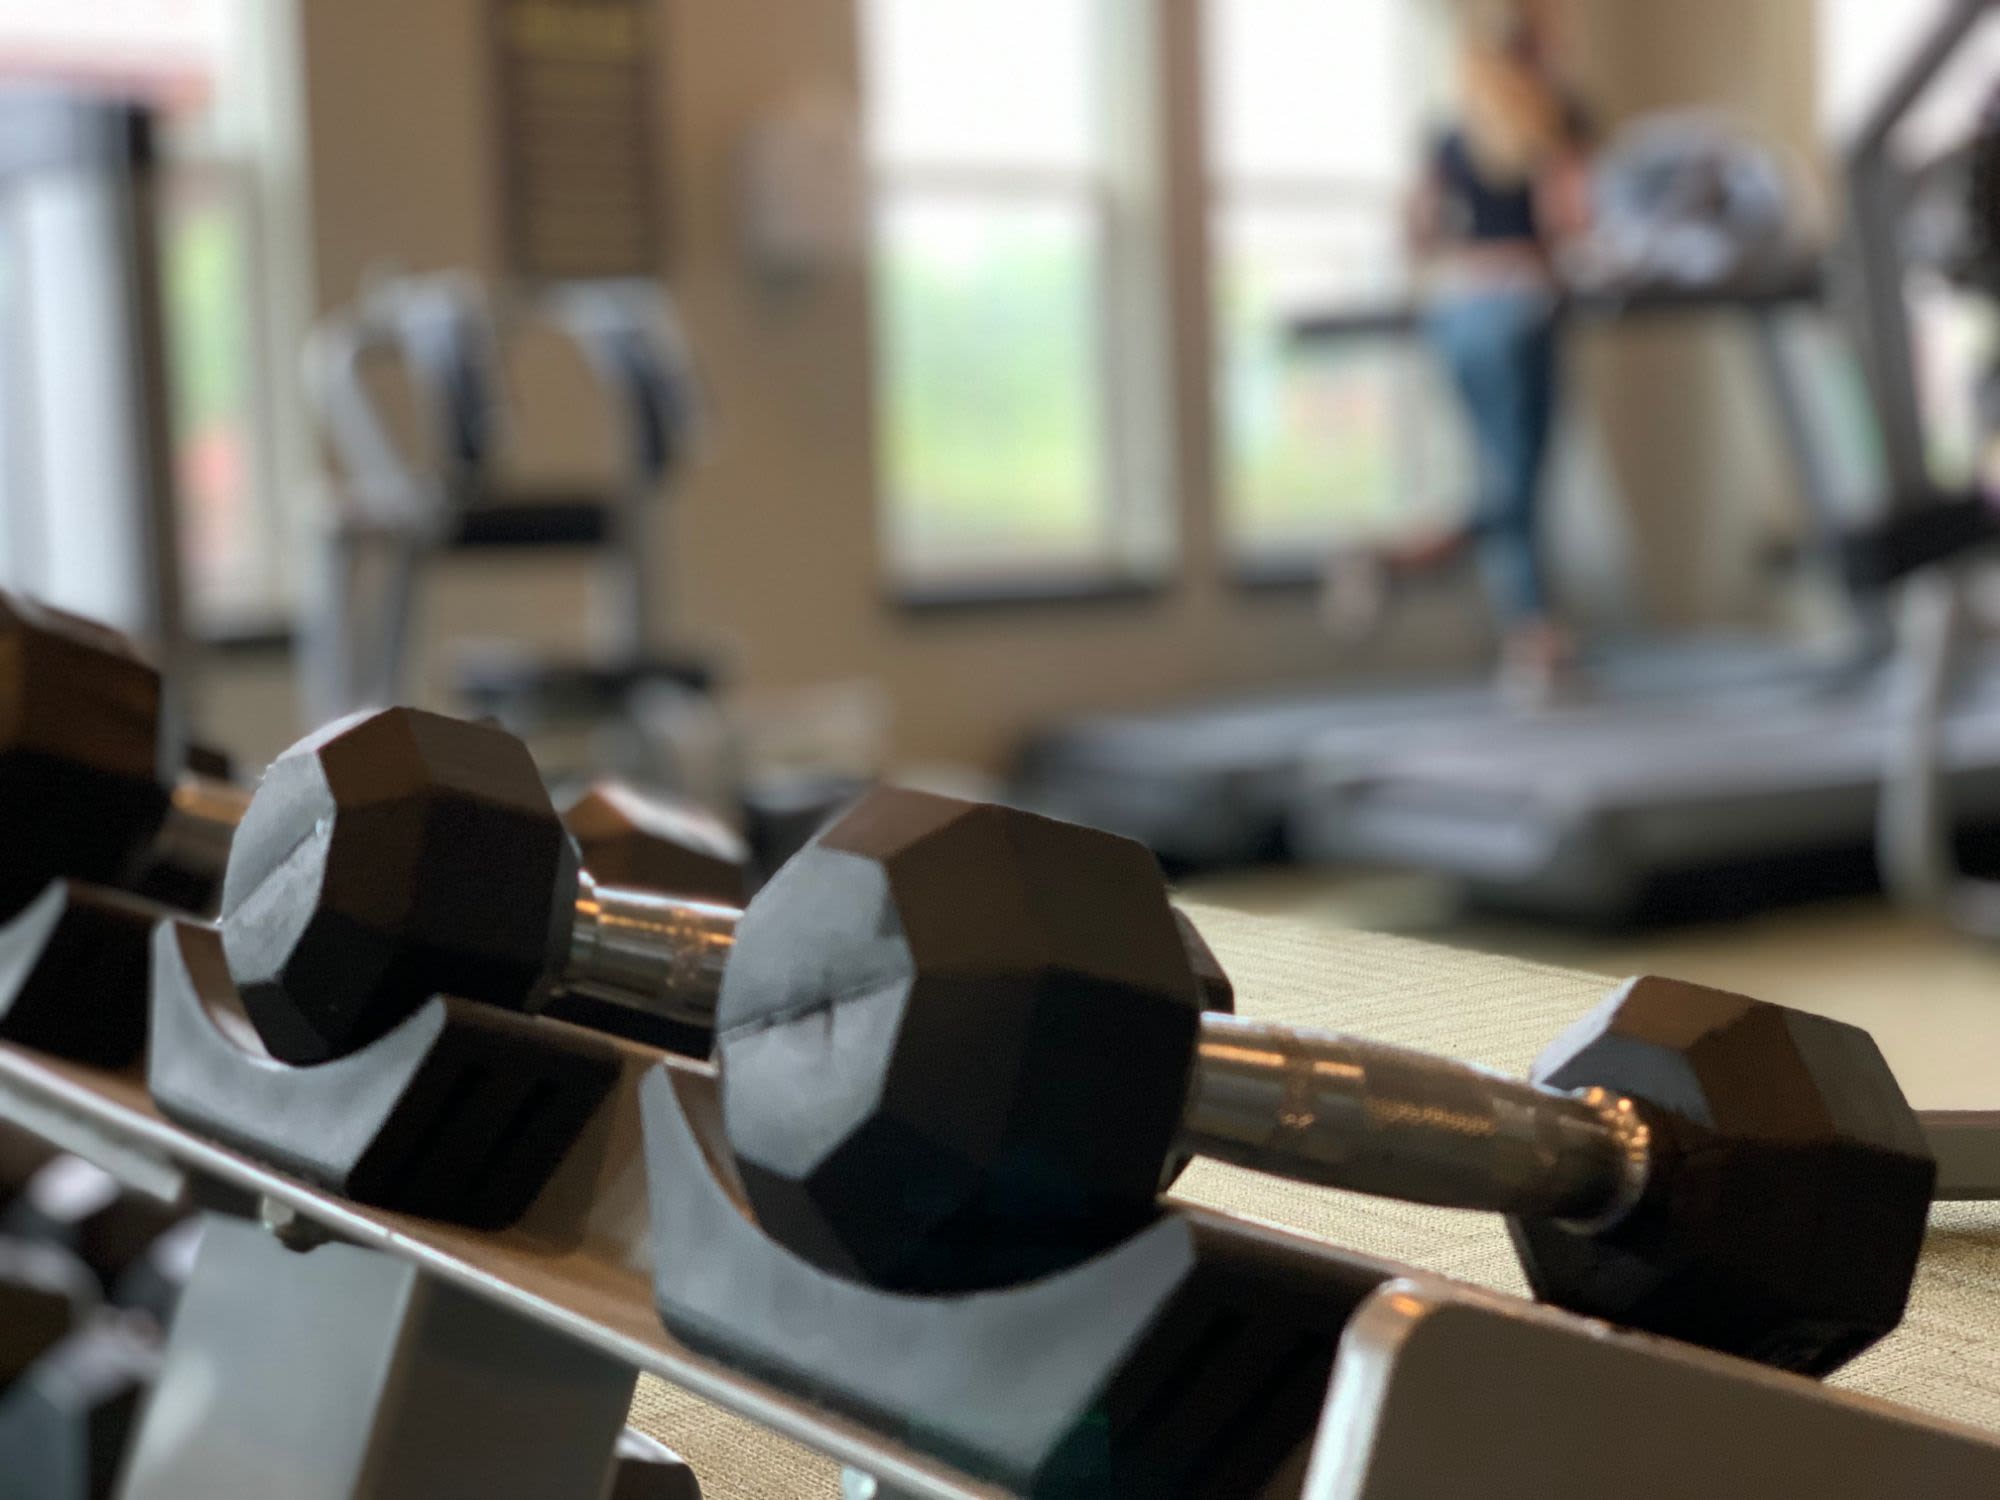 State-of-the-Art fitness center at Le Rivage Luxury Apartments in Bossier City, Louisiana